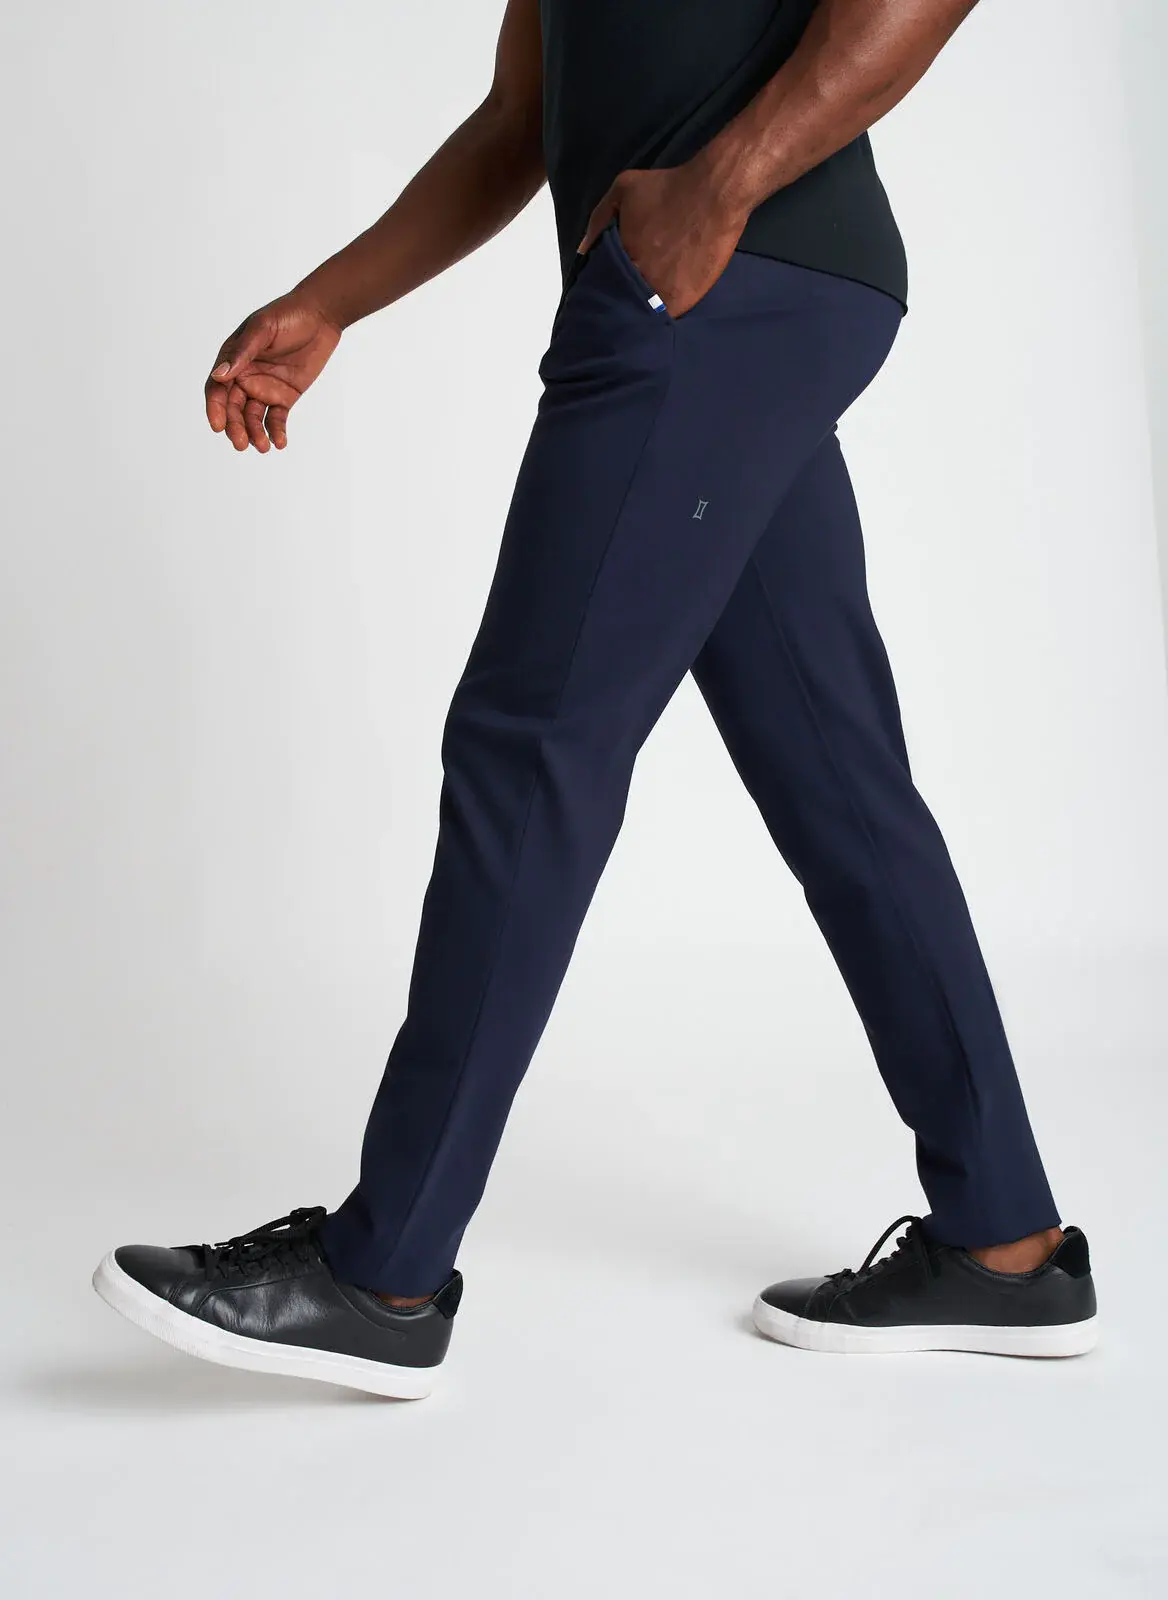 Kit And Ace Comfort Pants Slim Fit. 1